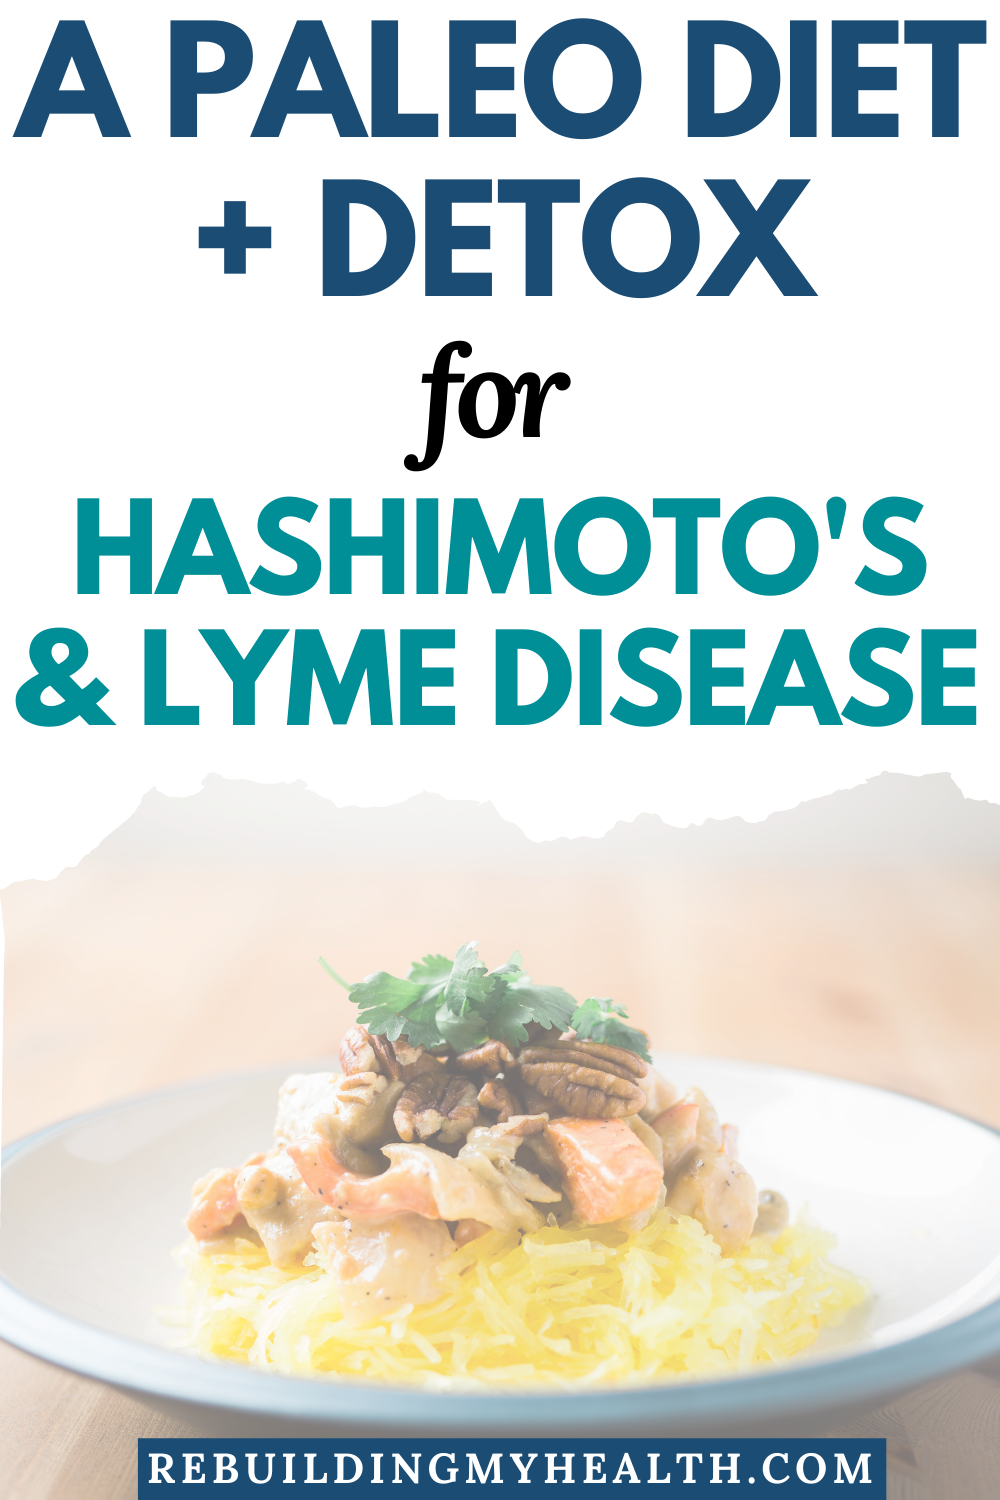 When Hashimoto's disease, Lyme disease and other diagnoses caused her health to crash, Jennifer turned to a paleo diet to reduce inflammation and get her health back.